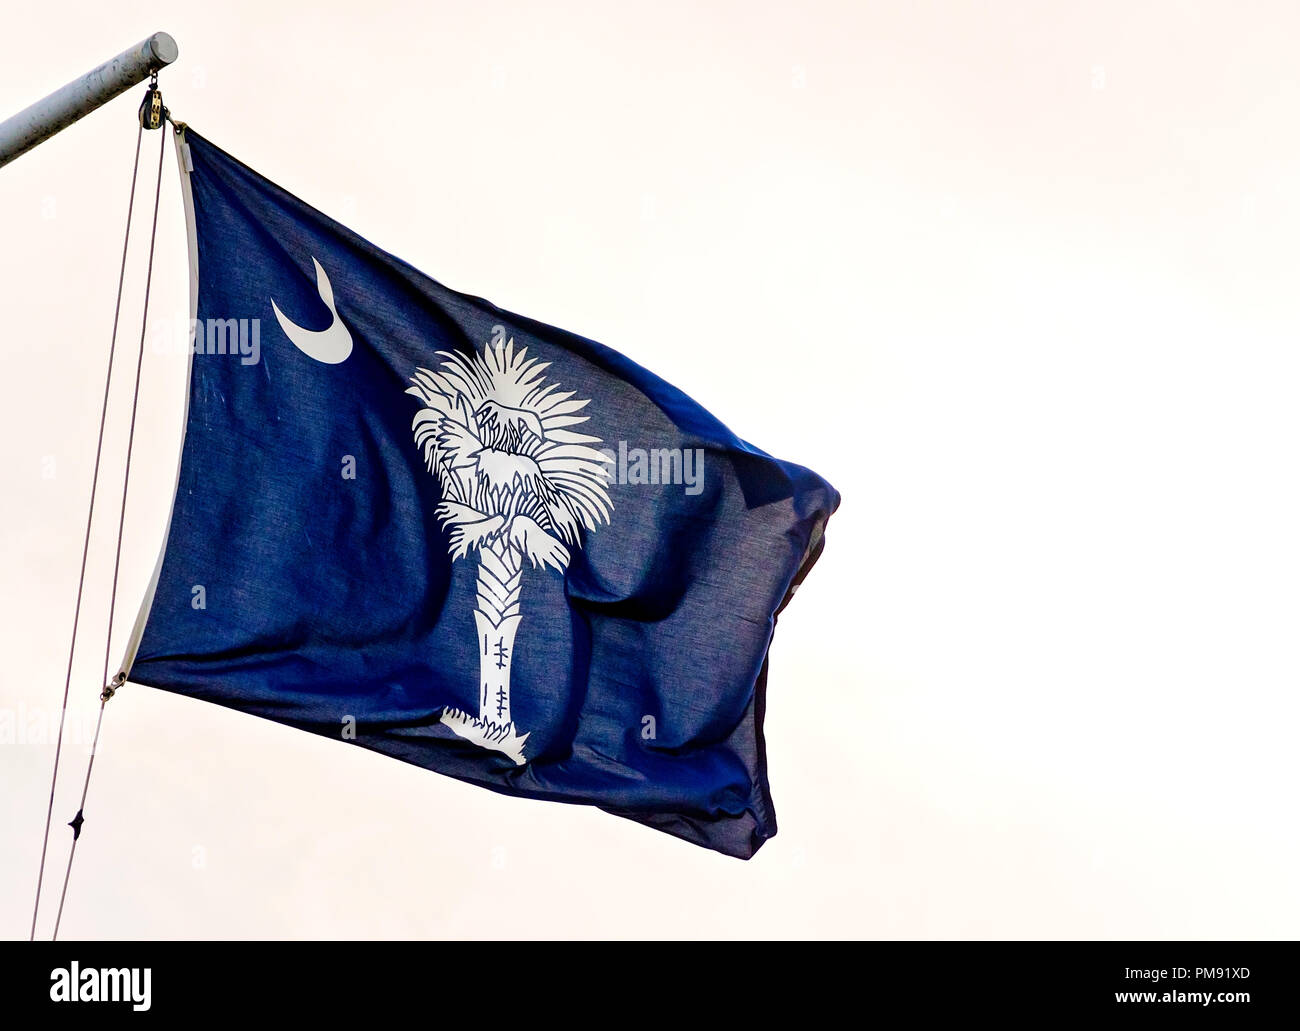 The South Carolina state flag flies at Waterfront Park fishing pier, April 5, 2015, in Charleston, South Carolina. The flag features a white palmetto  Stock Photo